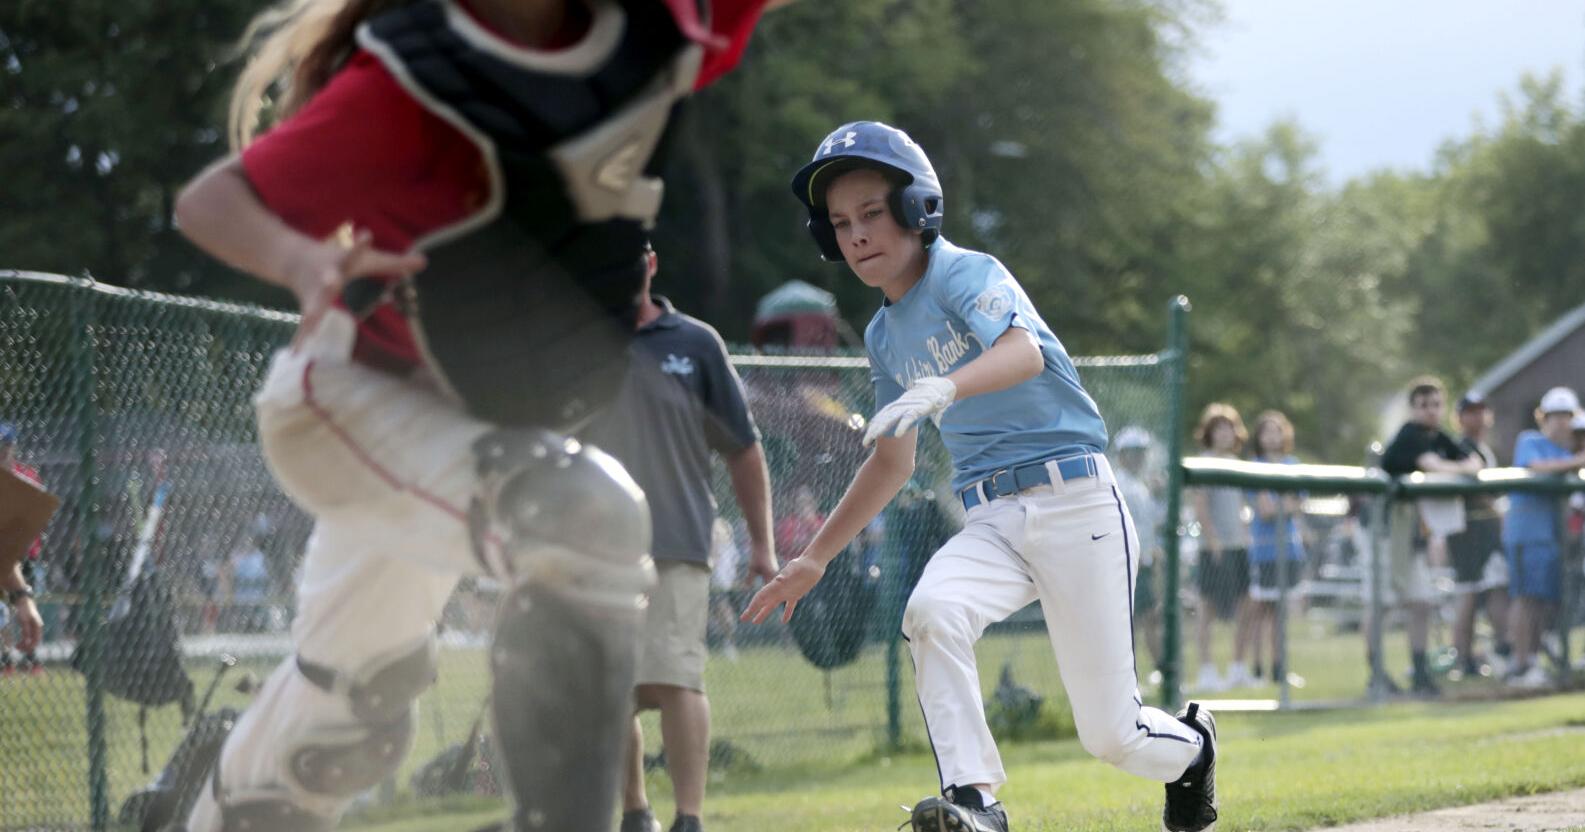 Berkshire Bank downs Fire Department in Pittsfield Little League City Championship game